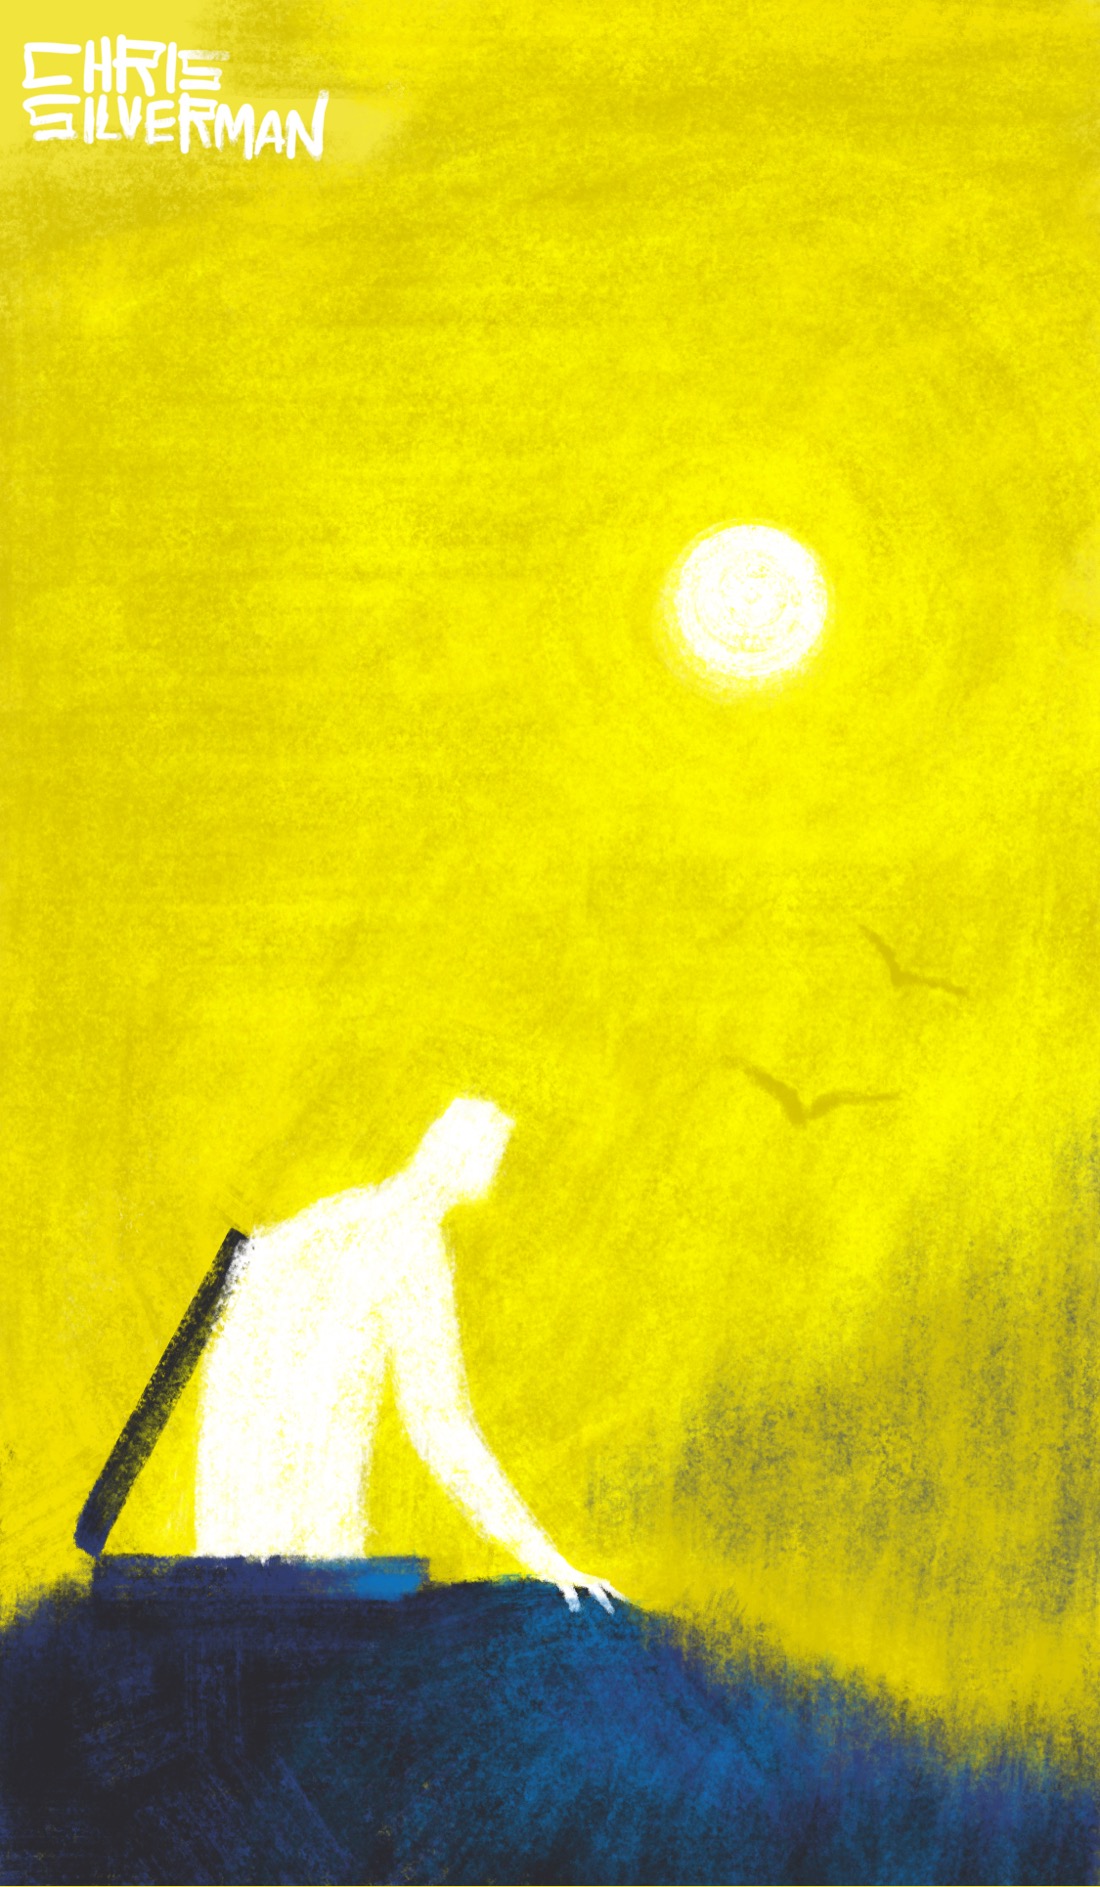 A glowing white humanoid figure climbs out of a trap door in the ground. In the background is the blurry suggestion of a wooded hill. The sun hangs high in yellow sky. Two birds fly overhead.